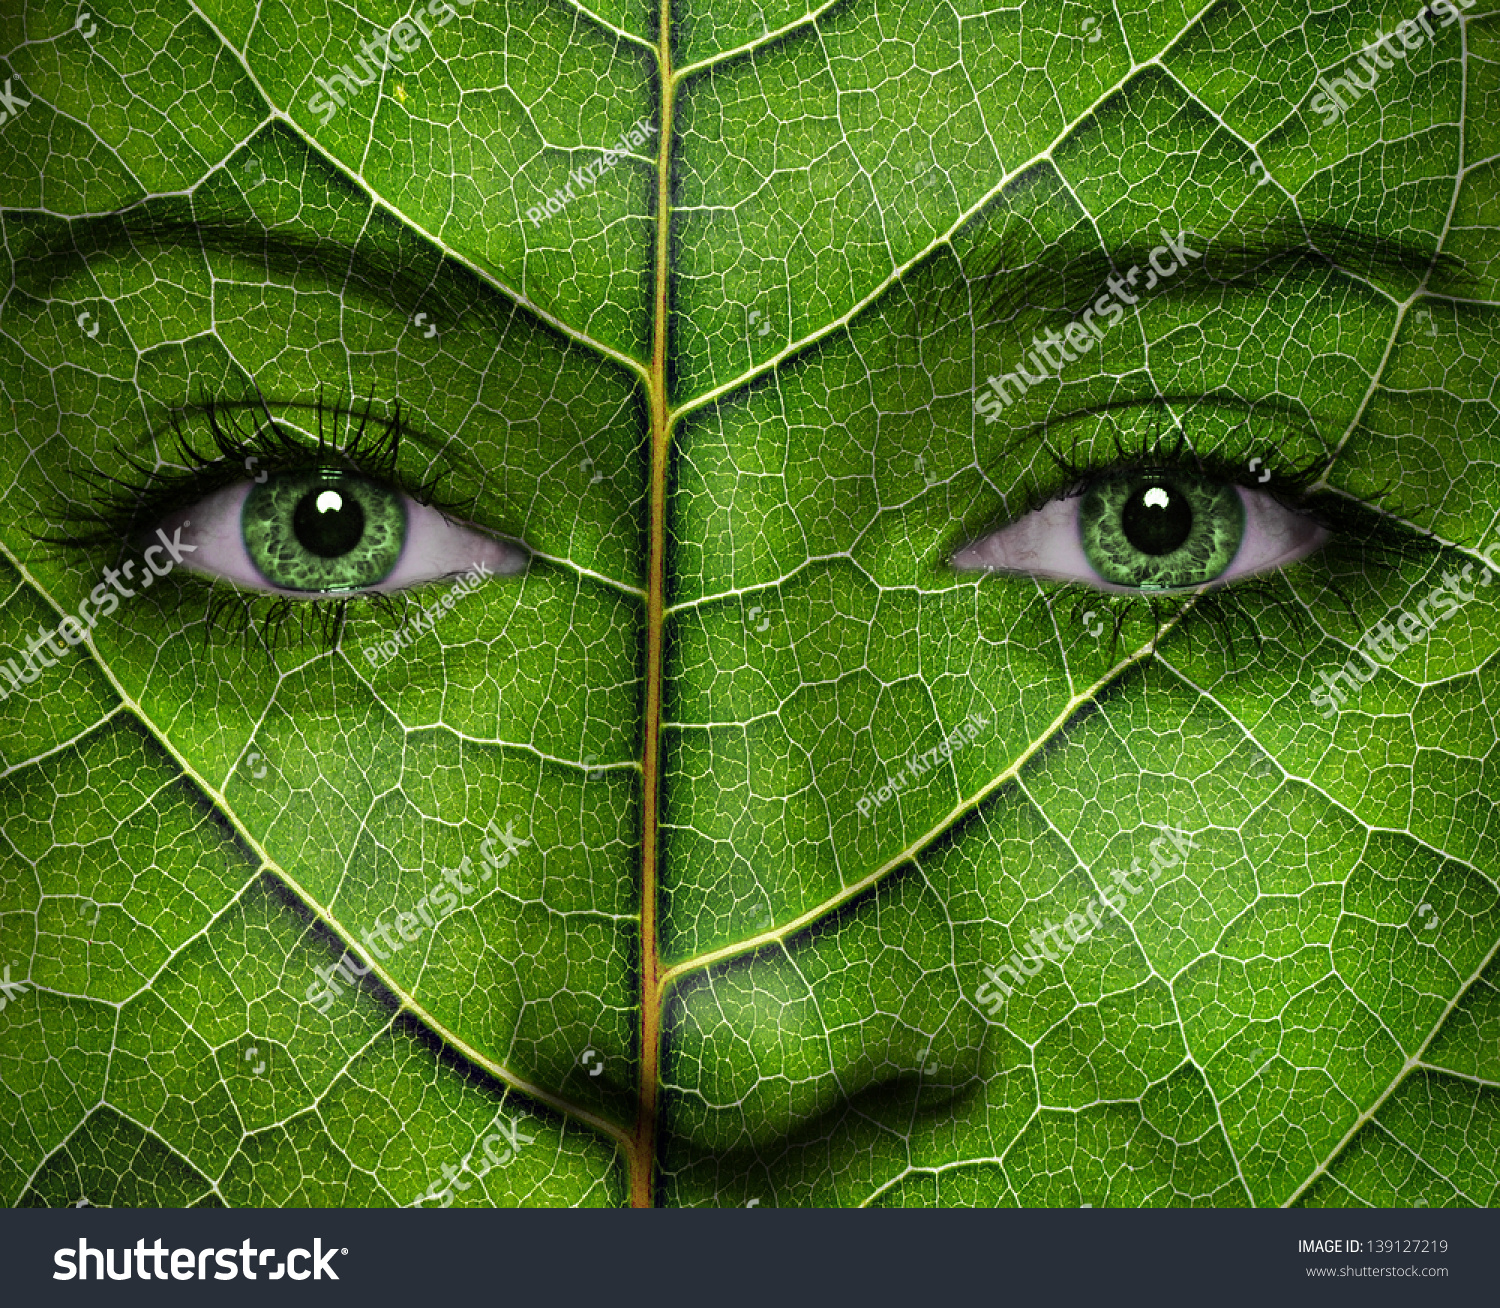 Woman Face Leaf Texture Green Eyes Stock Photo (Royalty Free ...